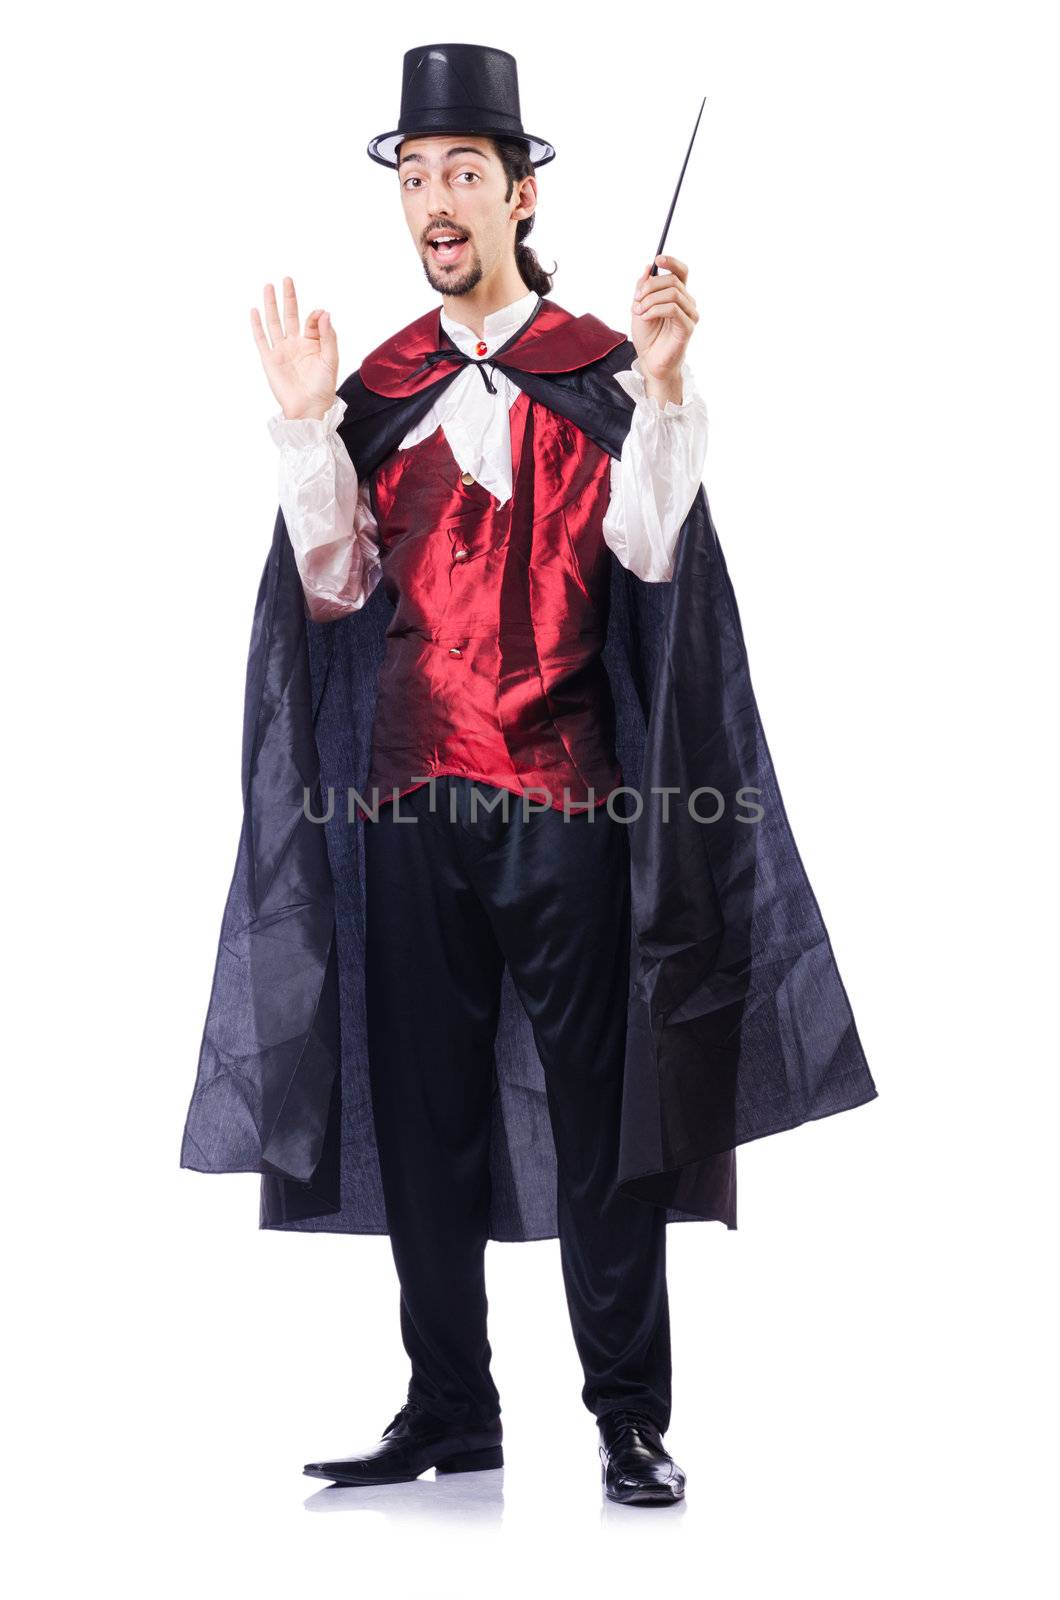 Magician with his magic wand on white